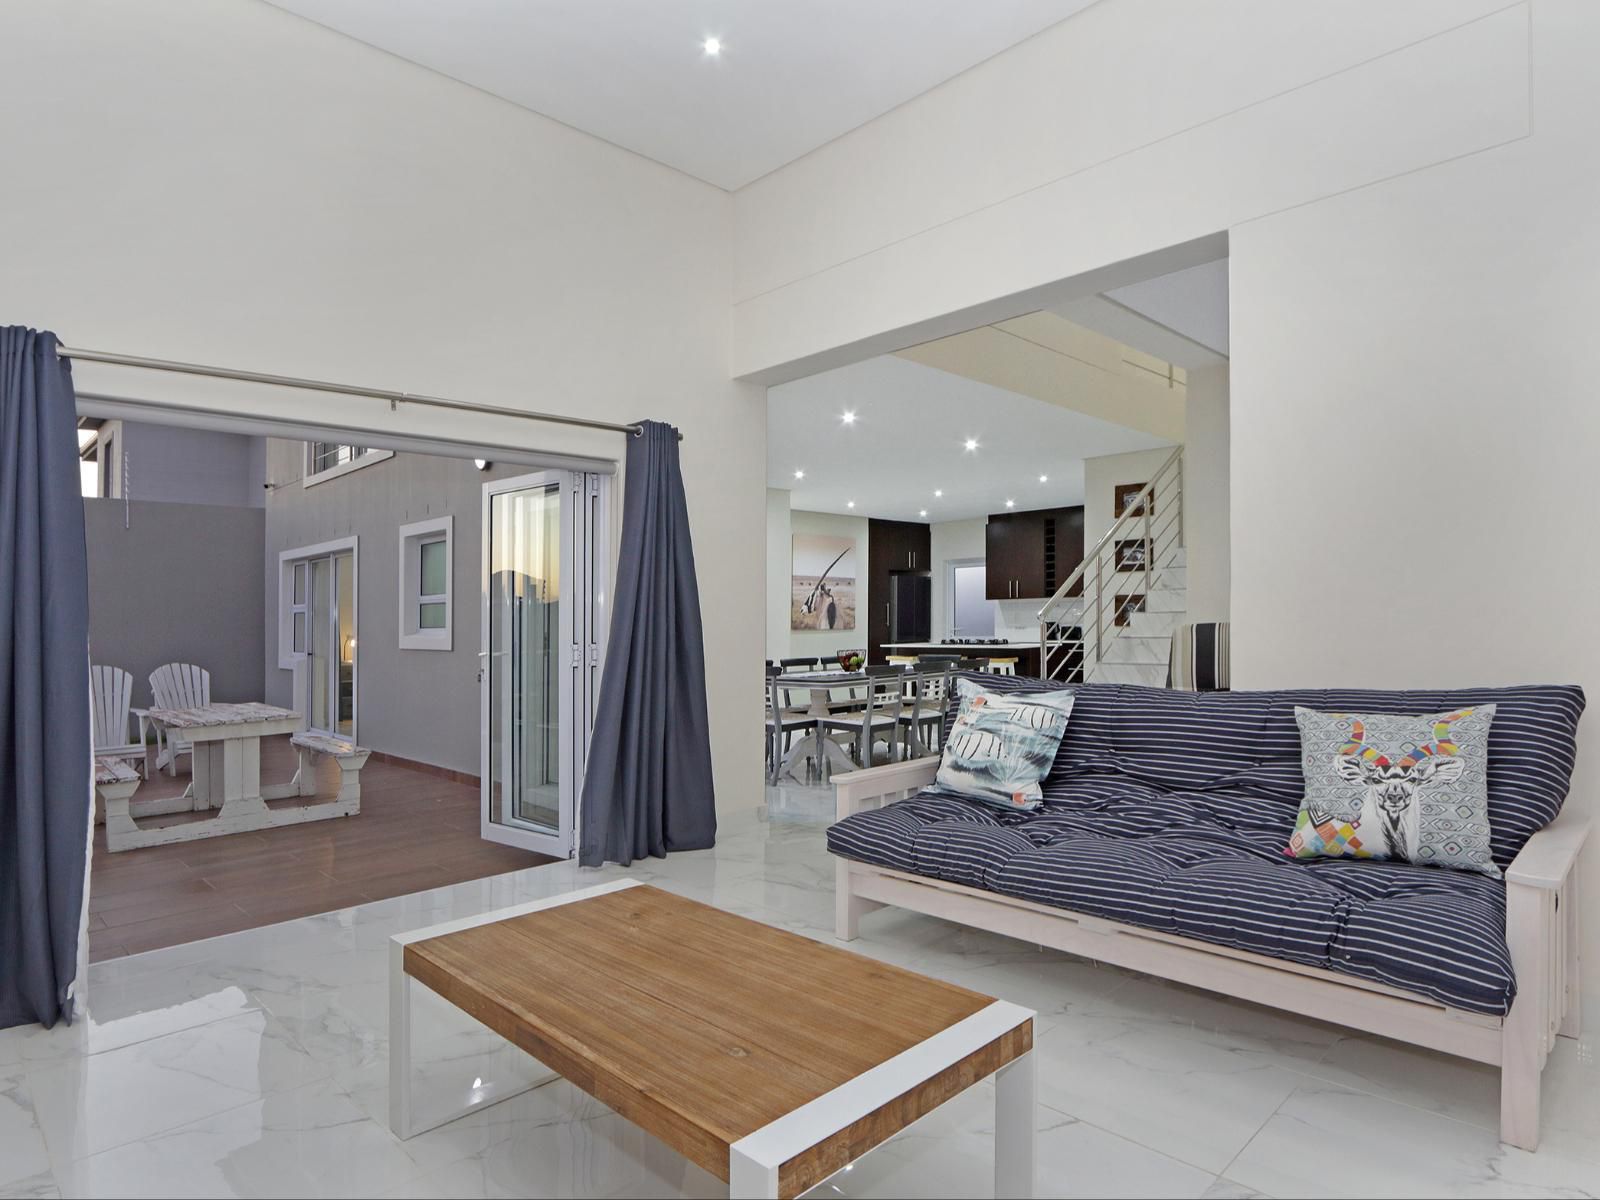 Bayford House By Hostagents Parklands Blouberg Western Cape South Africa Unsaturated, Bedroom